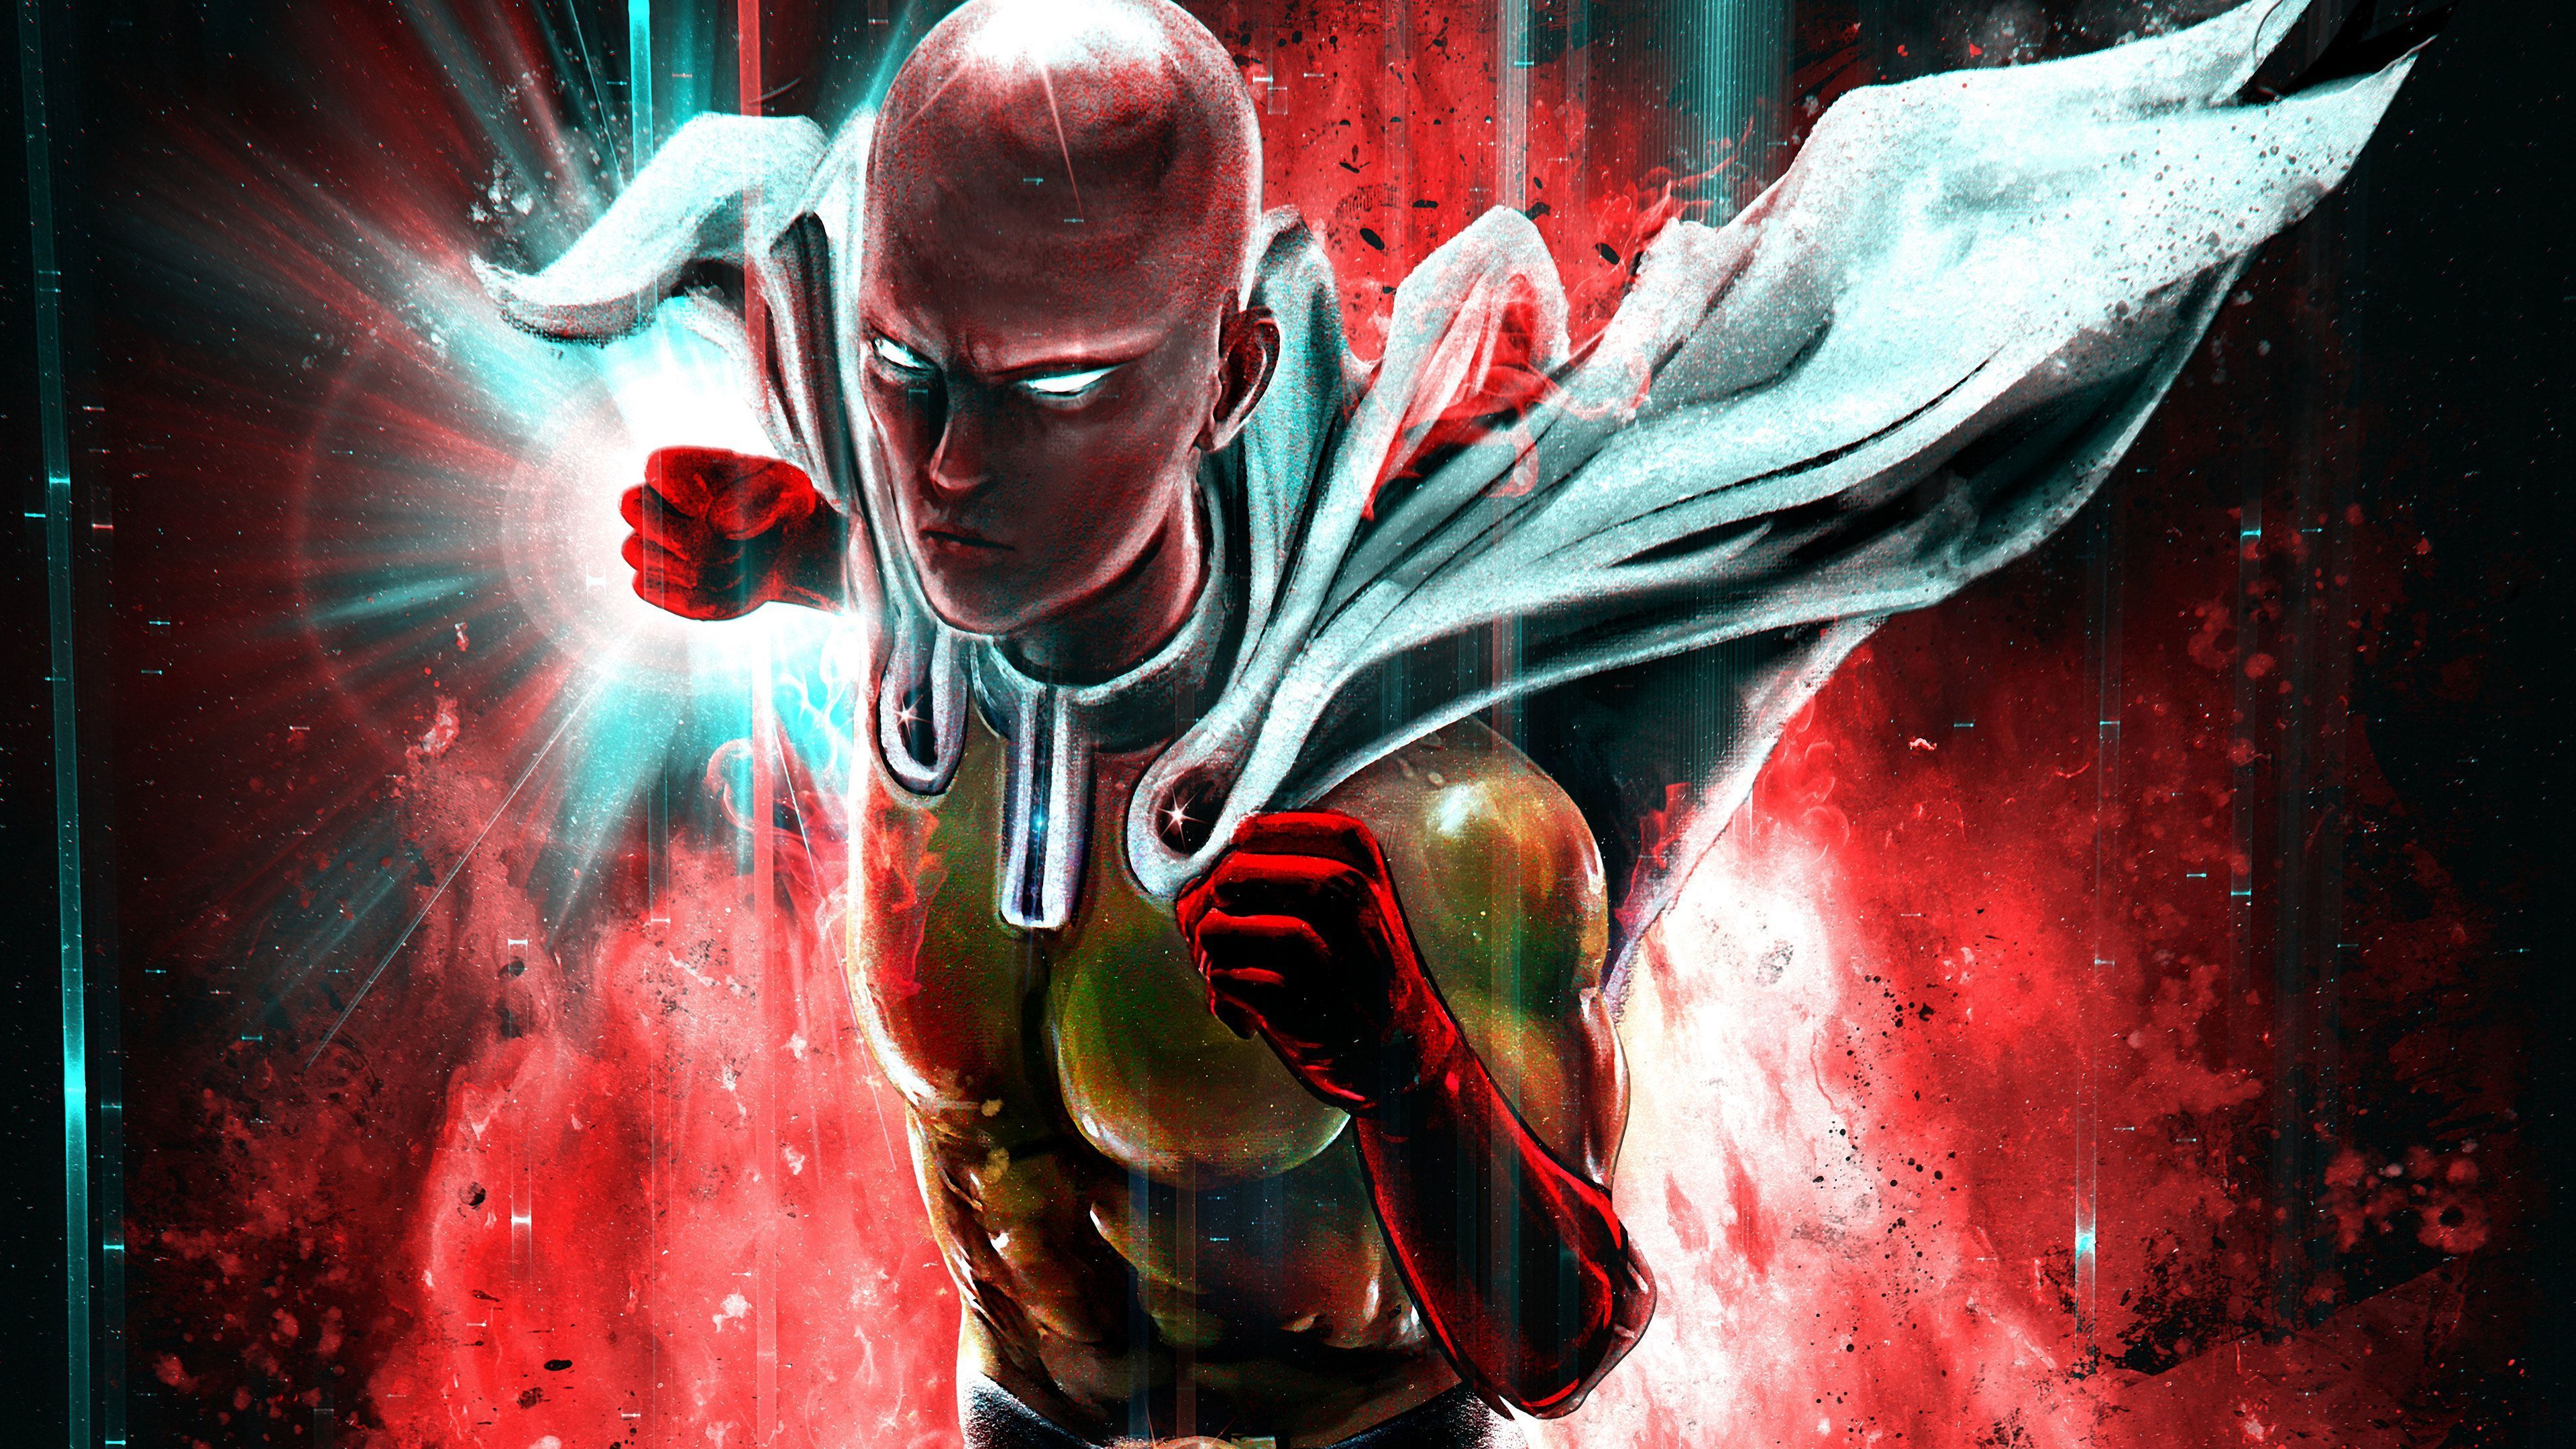 One Punch Man Wallpaper For Pc - Wallpaperforu